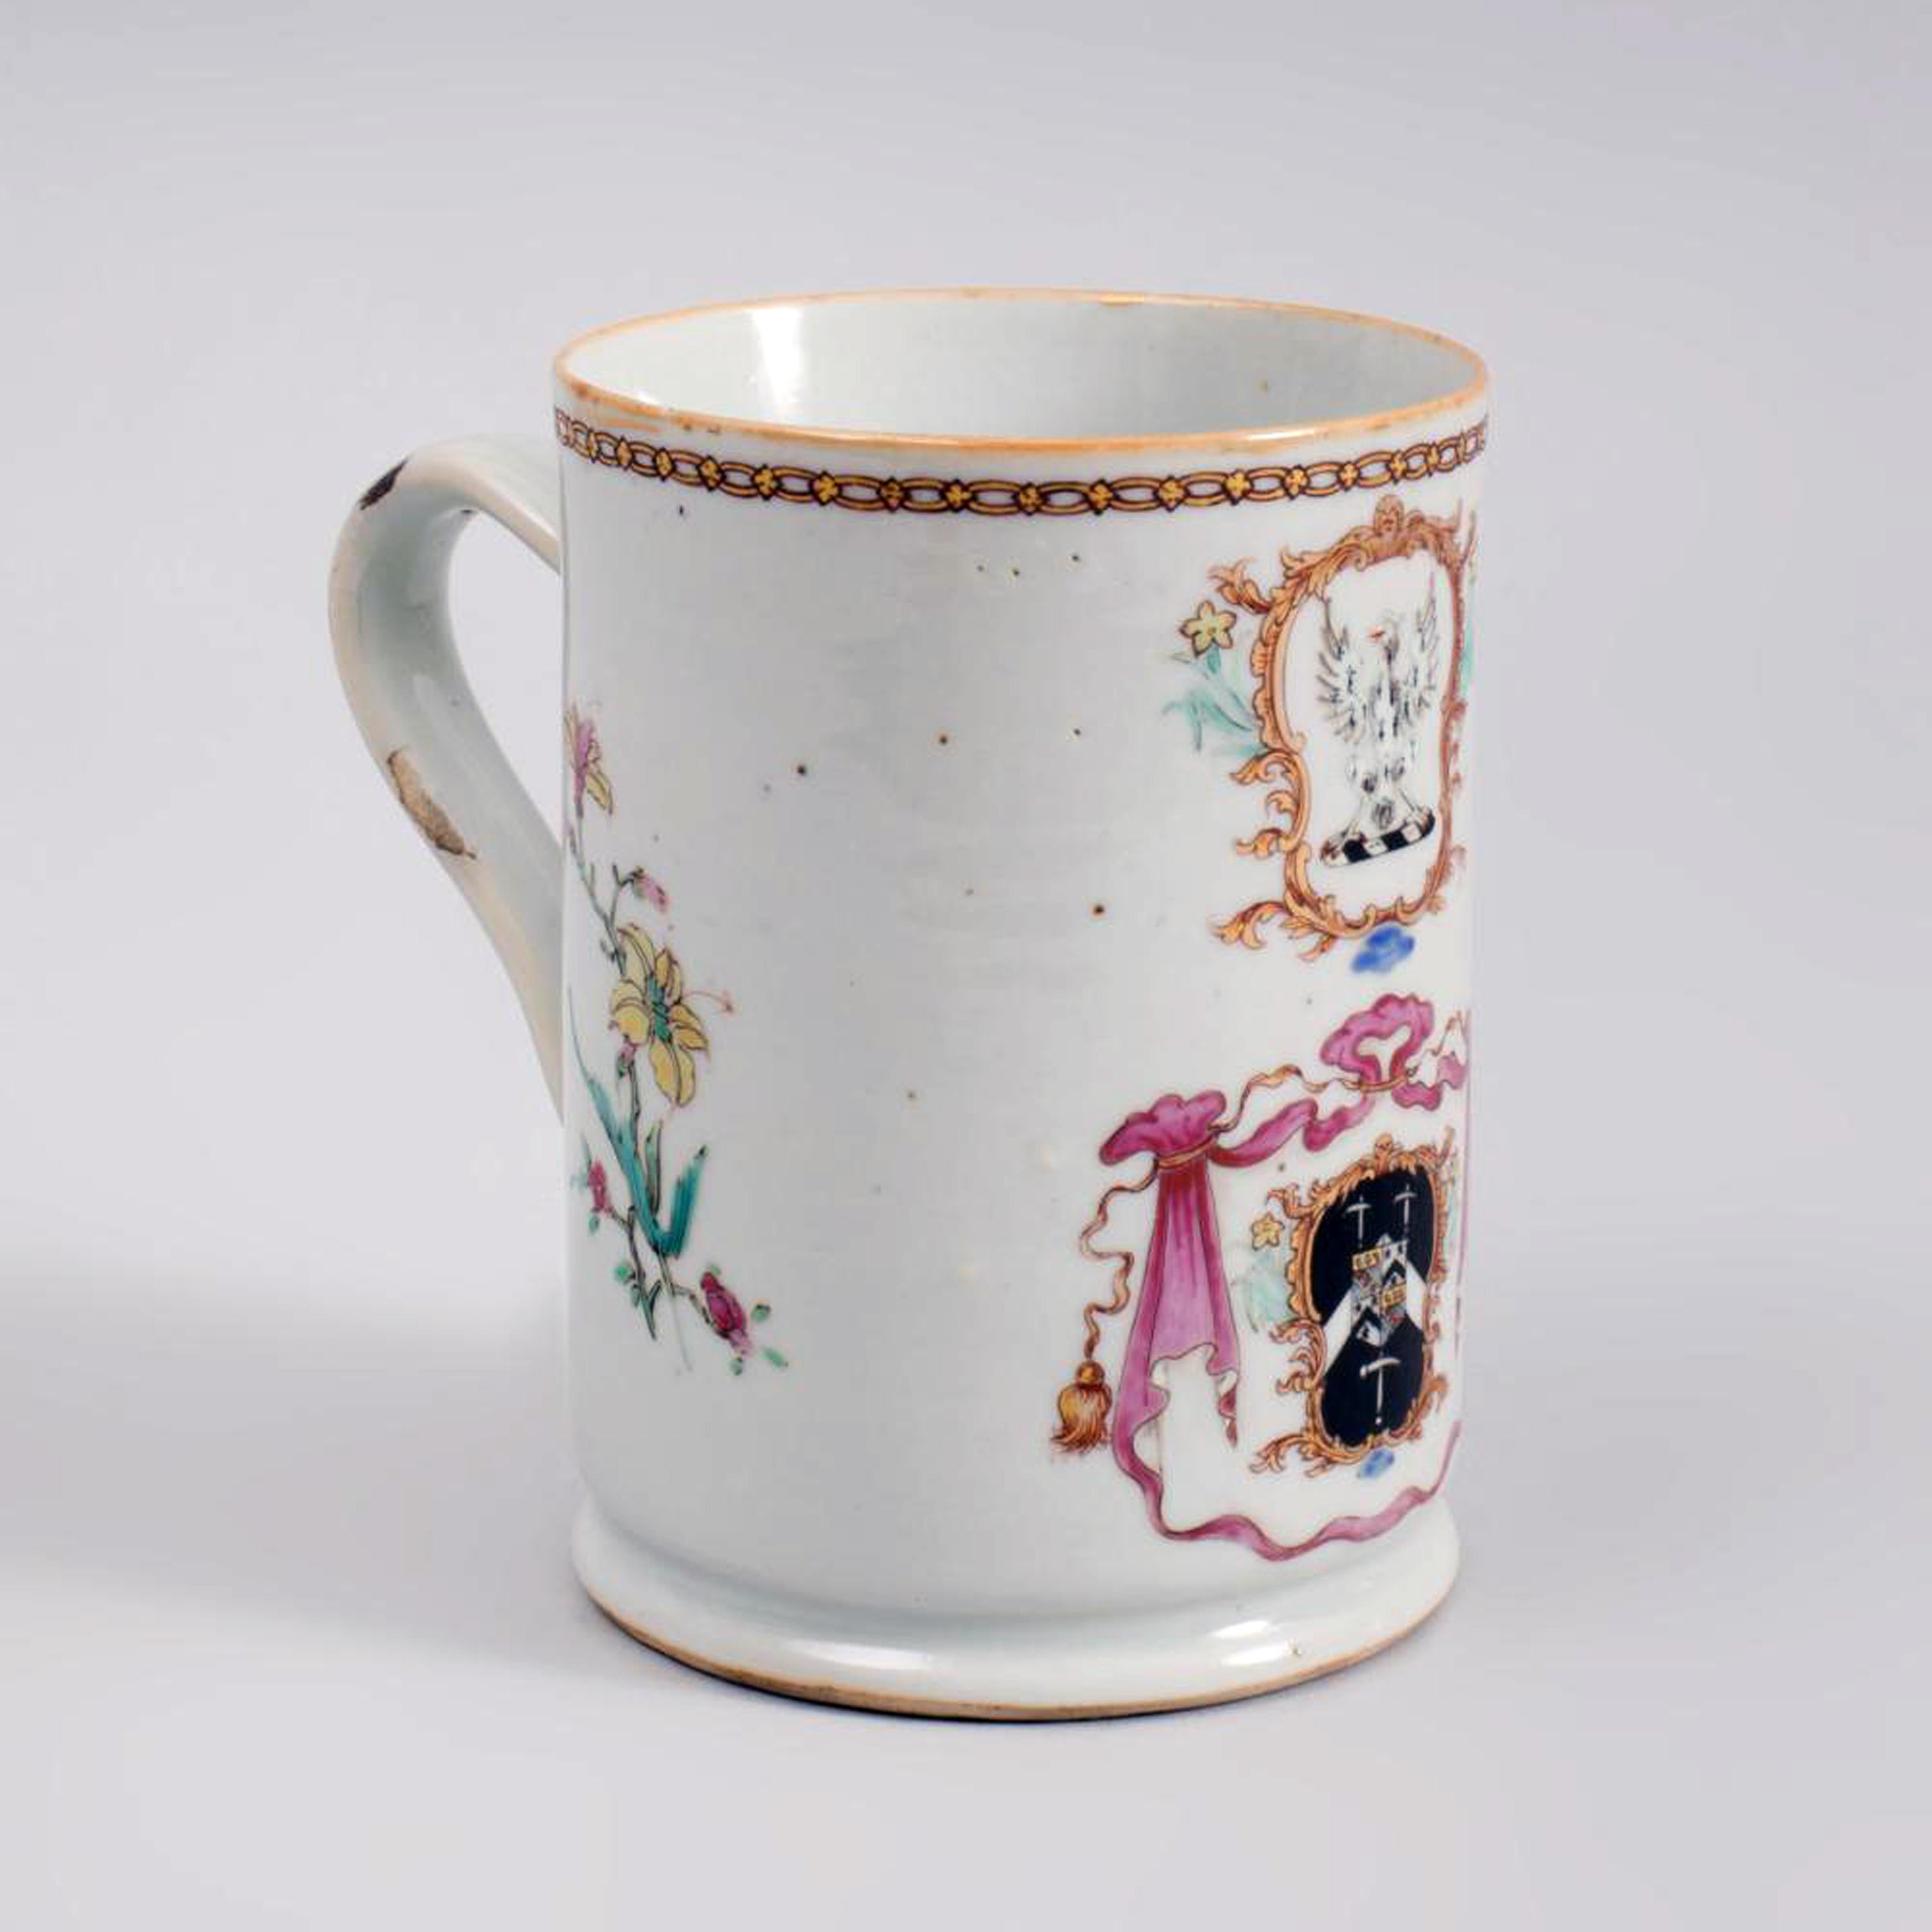 Ceramic Chinese Export Porcelain Armorial Tankard, Mosey with Pulleyne in Prentice For Sale